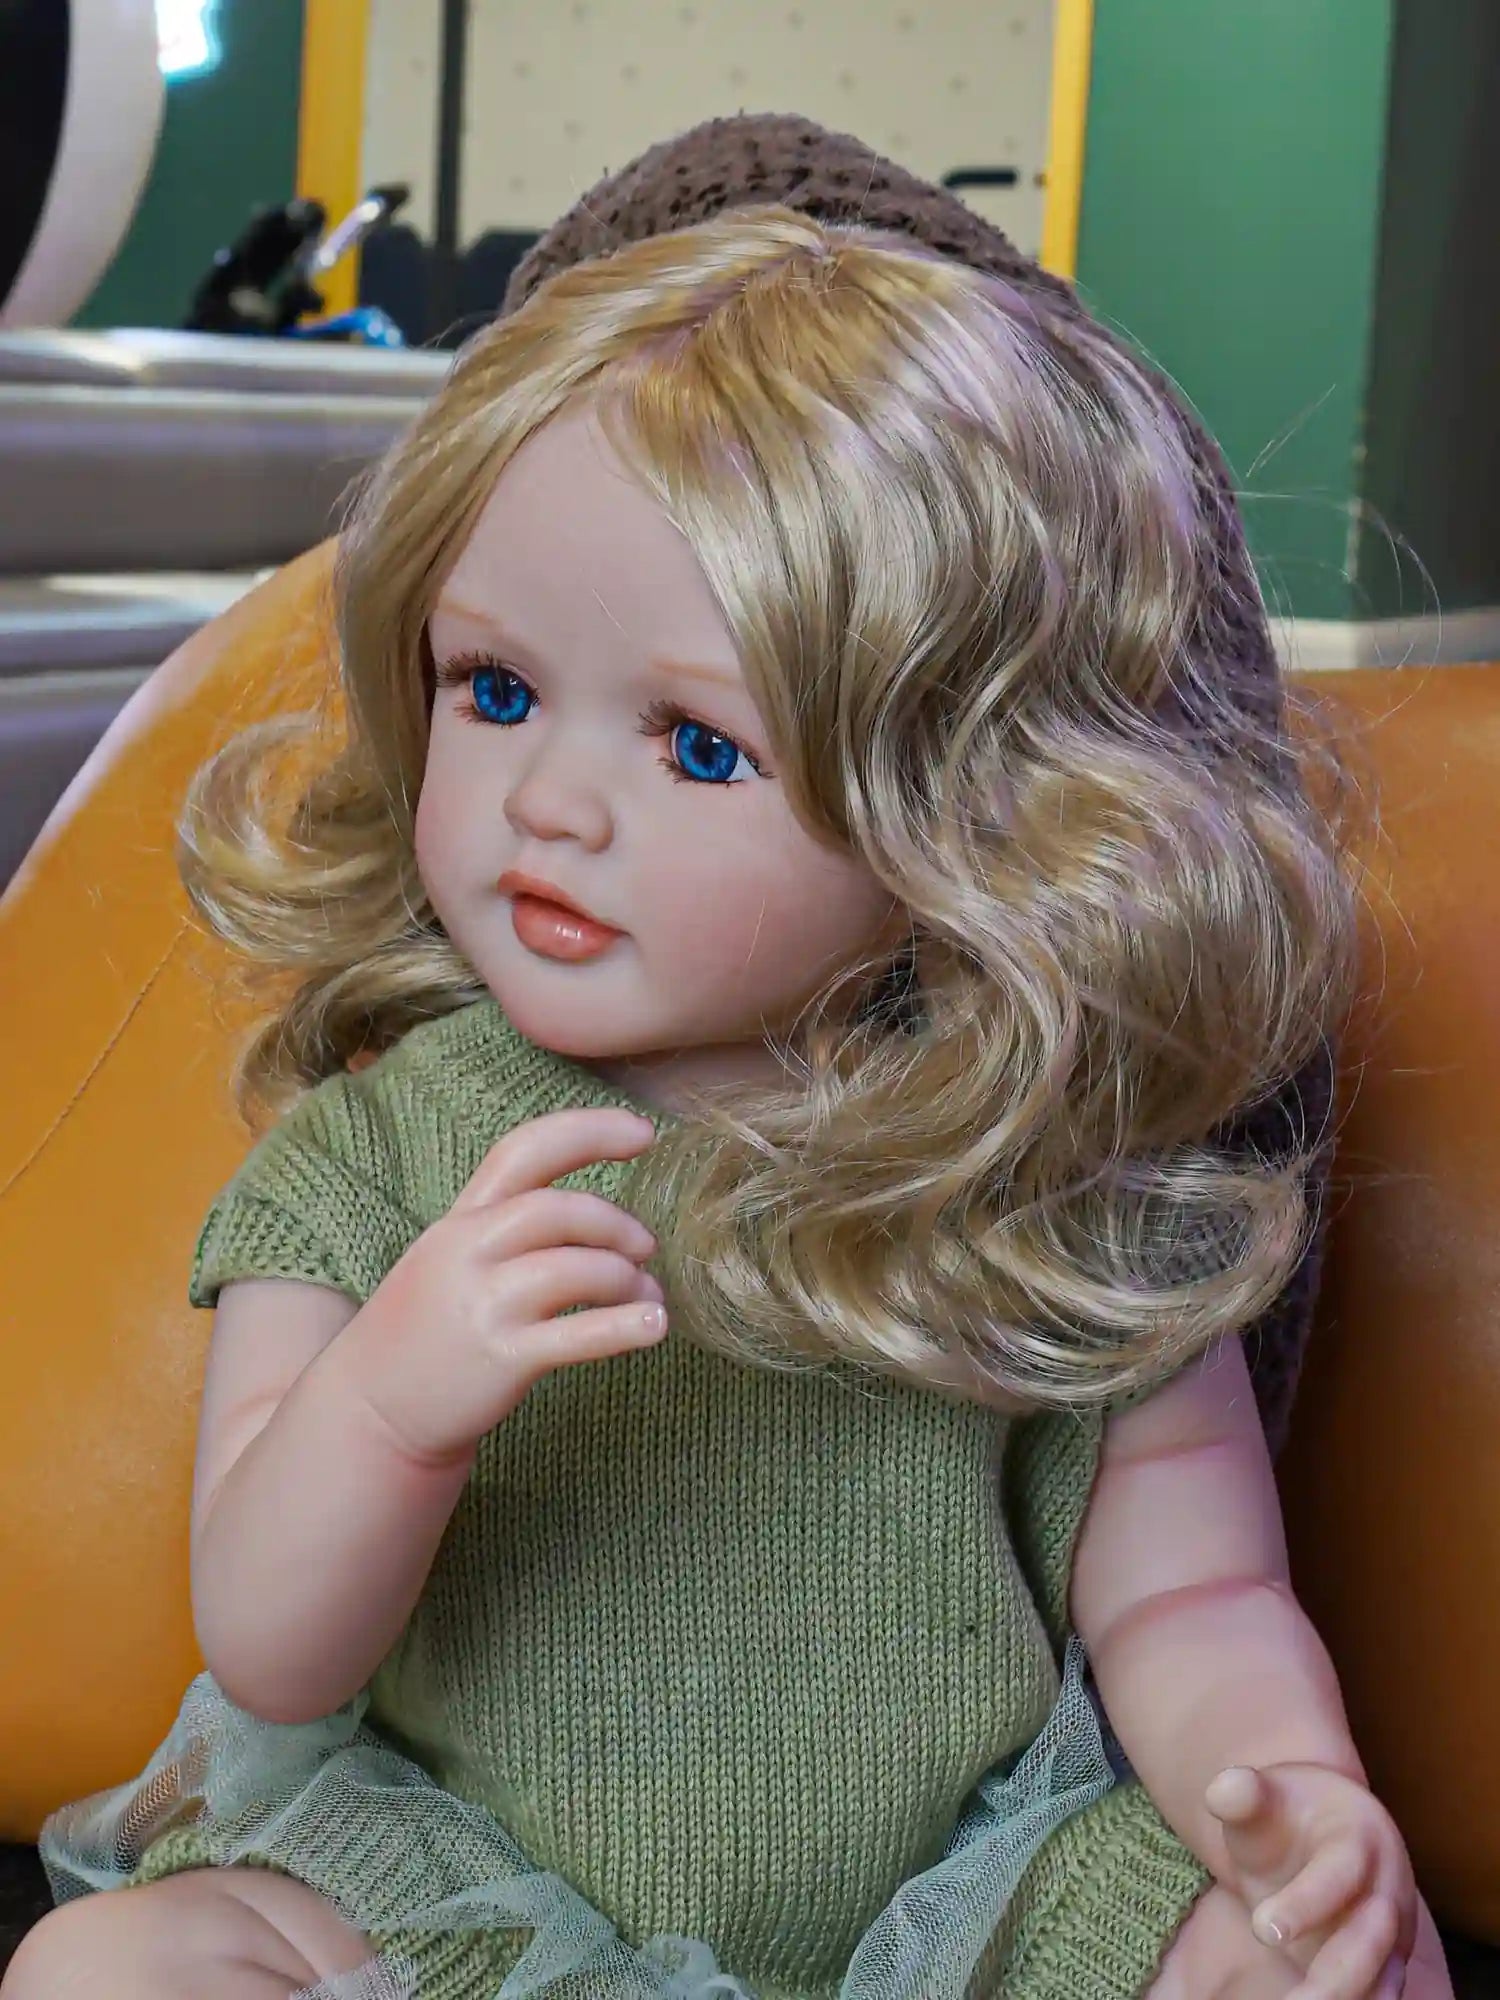 This reborn doll, with her gentle gaze and lush blonde waves, comes adorned in a cozy green garment, ready to be loved and cherished.